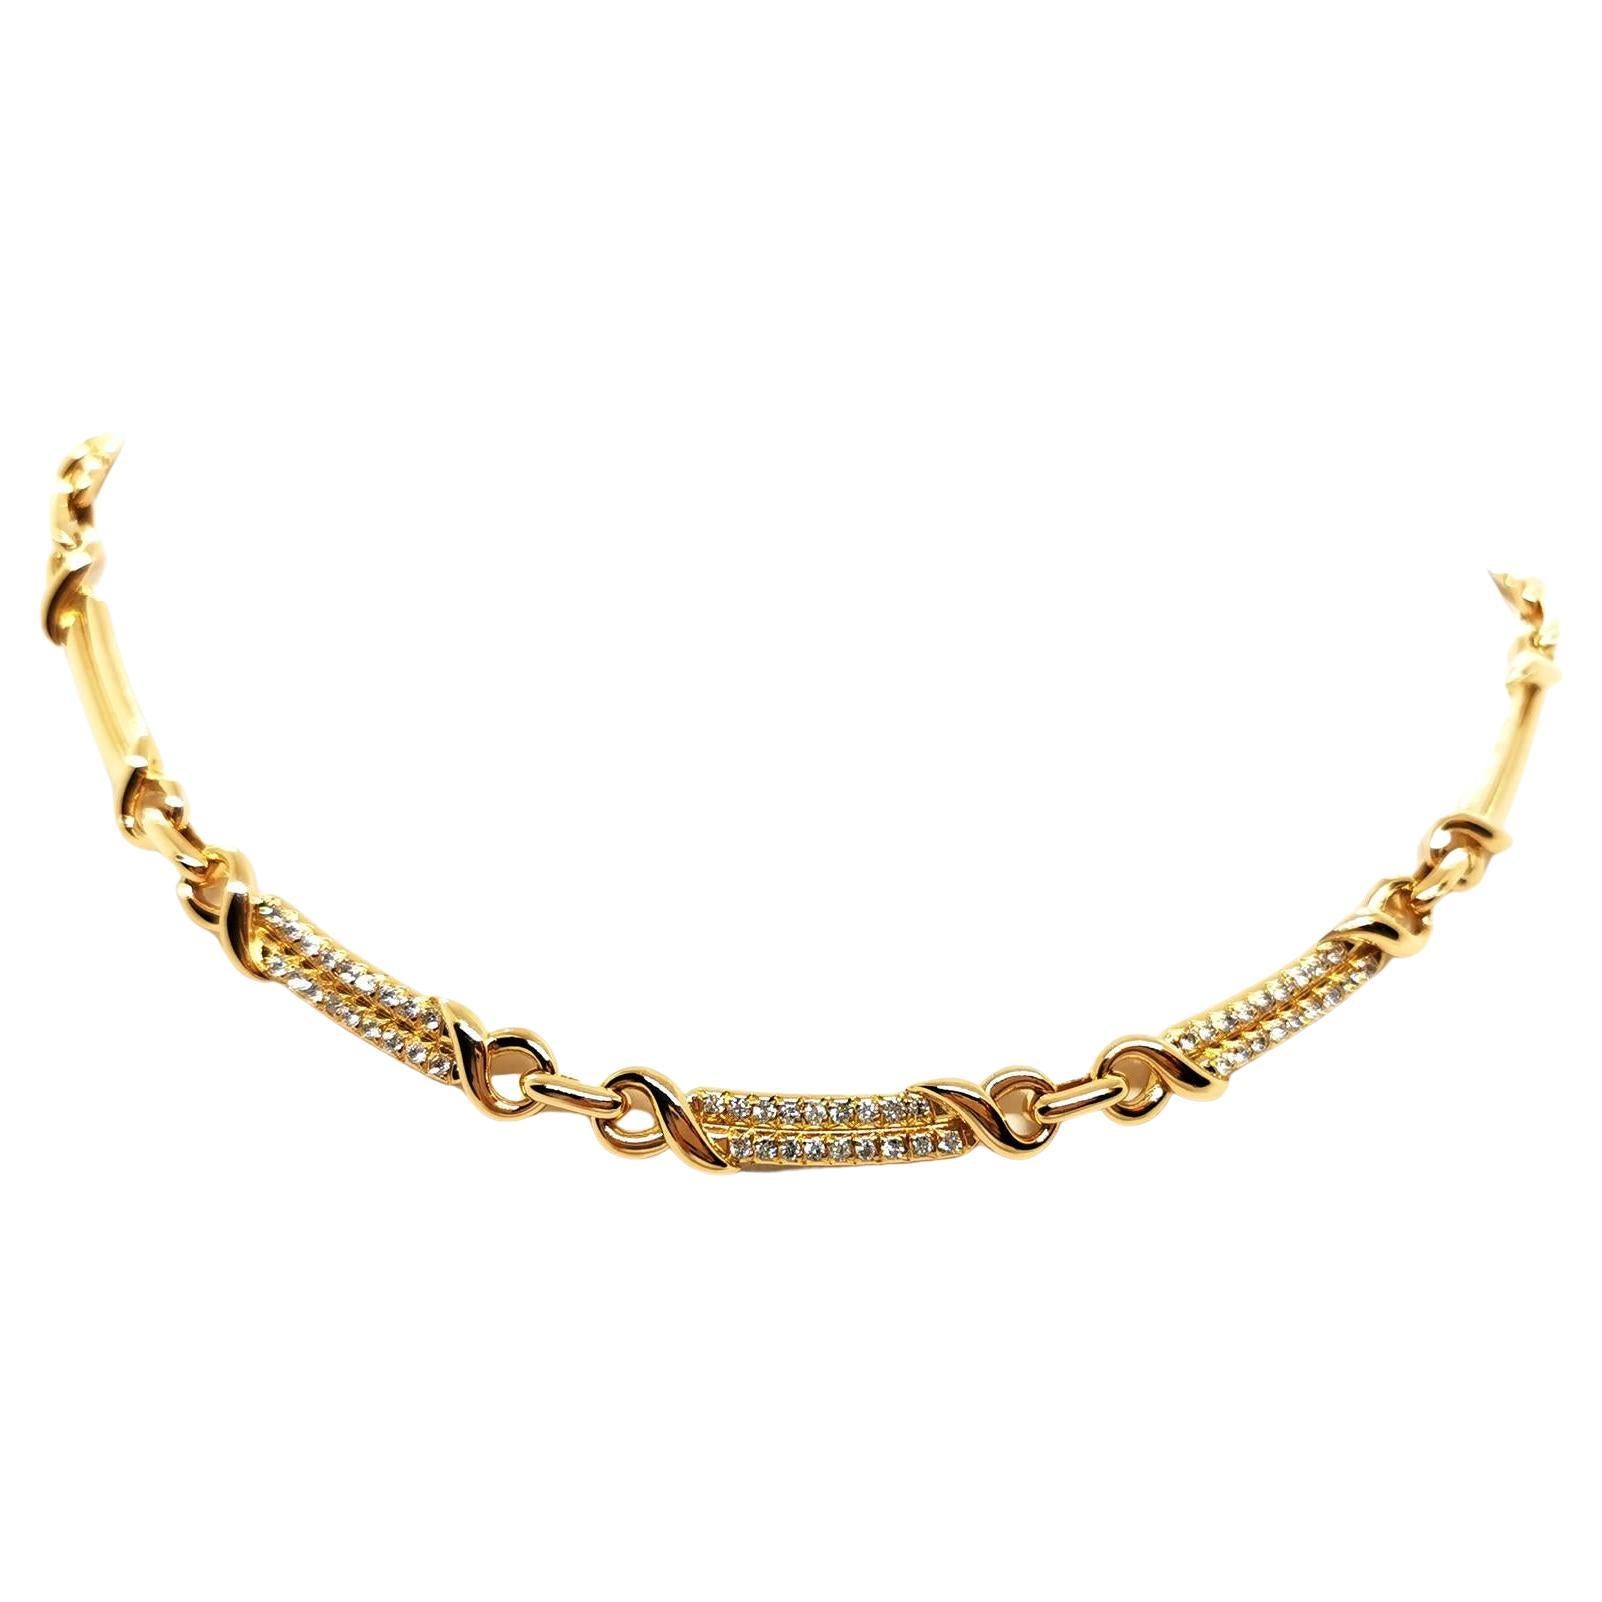 Chain Necklace Yellow Gold Diamond